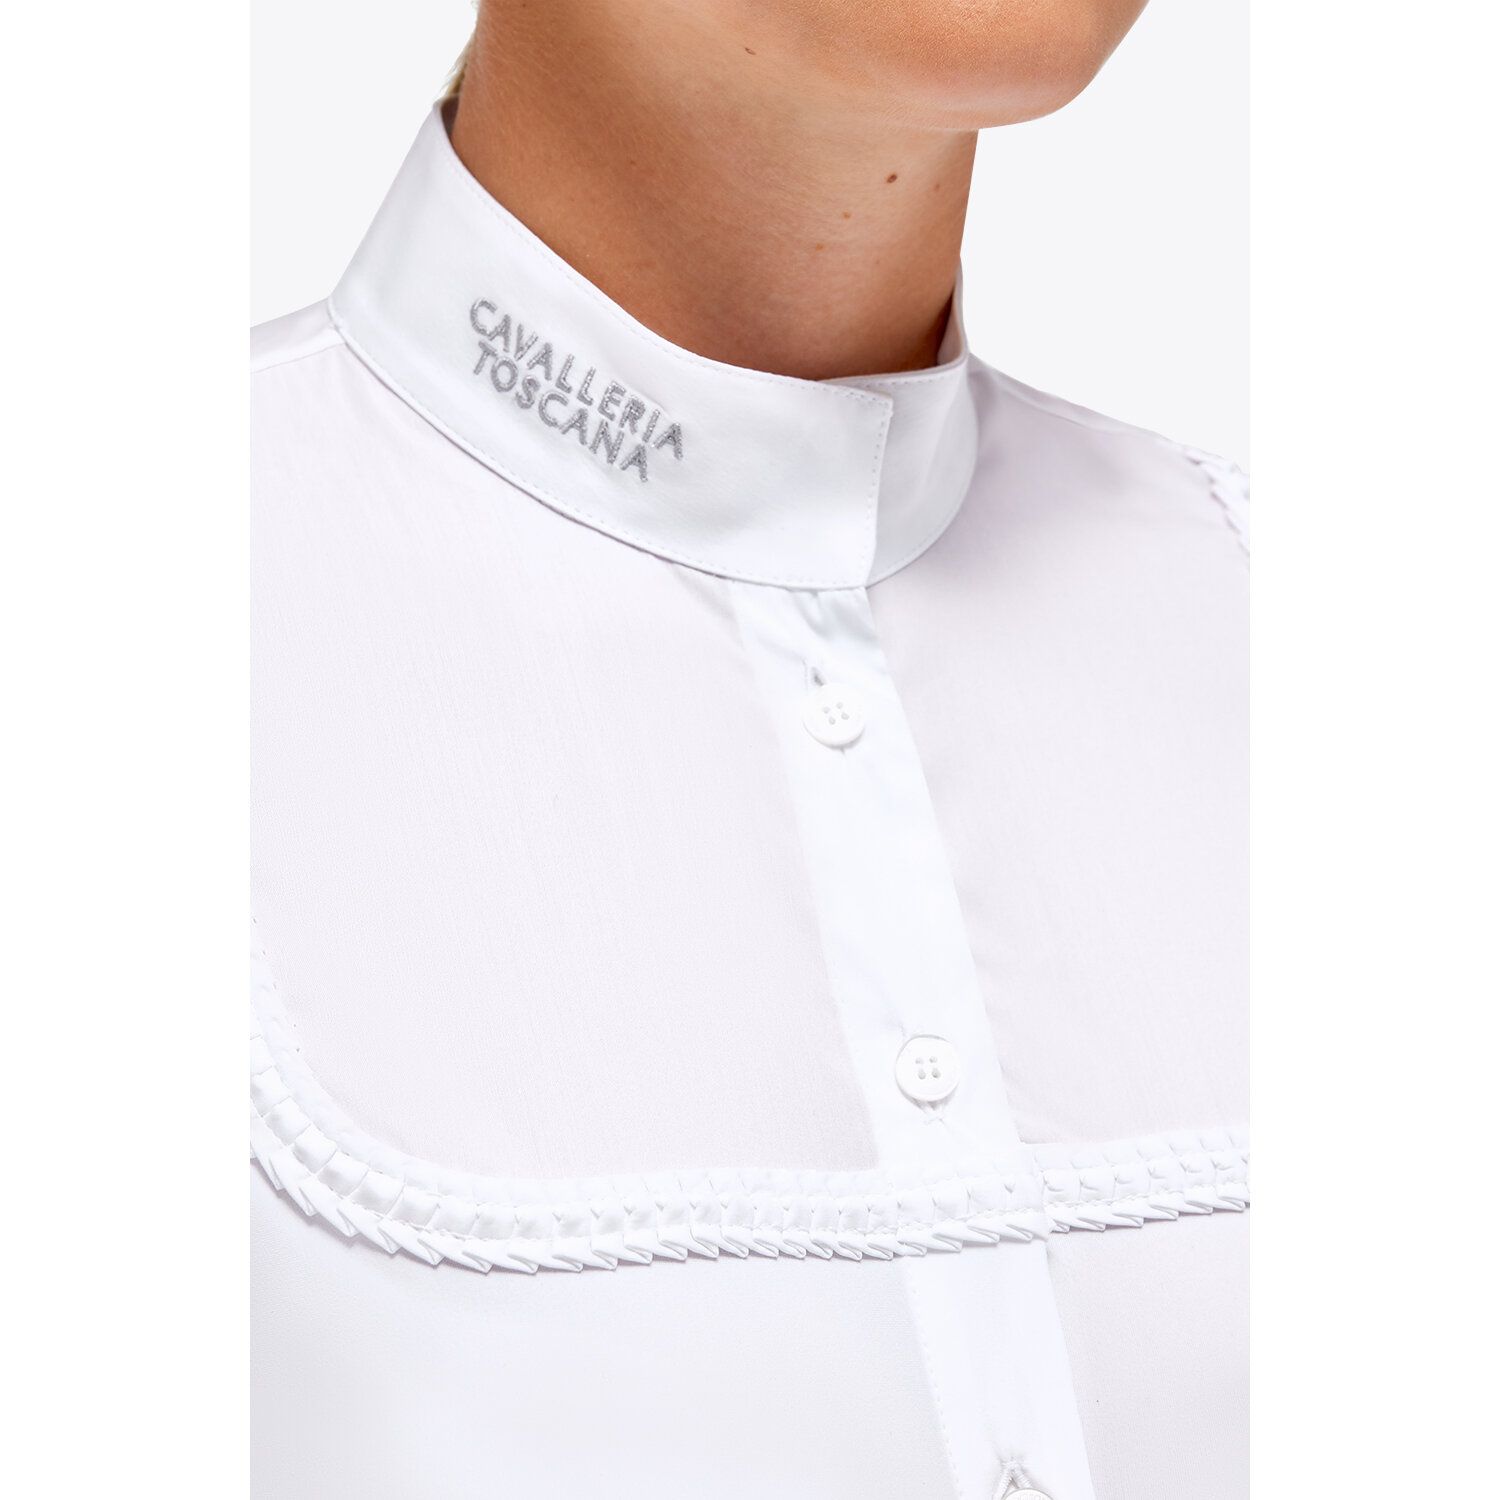 Cavalleria Toscana Women's Jersey Competition Shirt WHITE-5